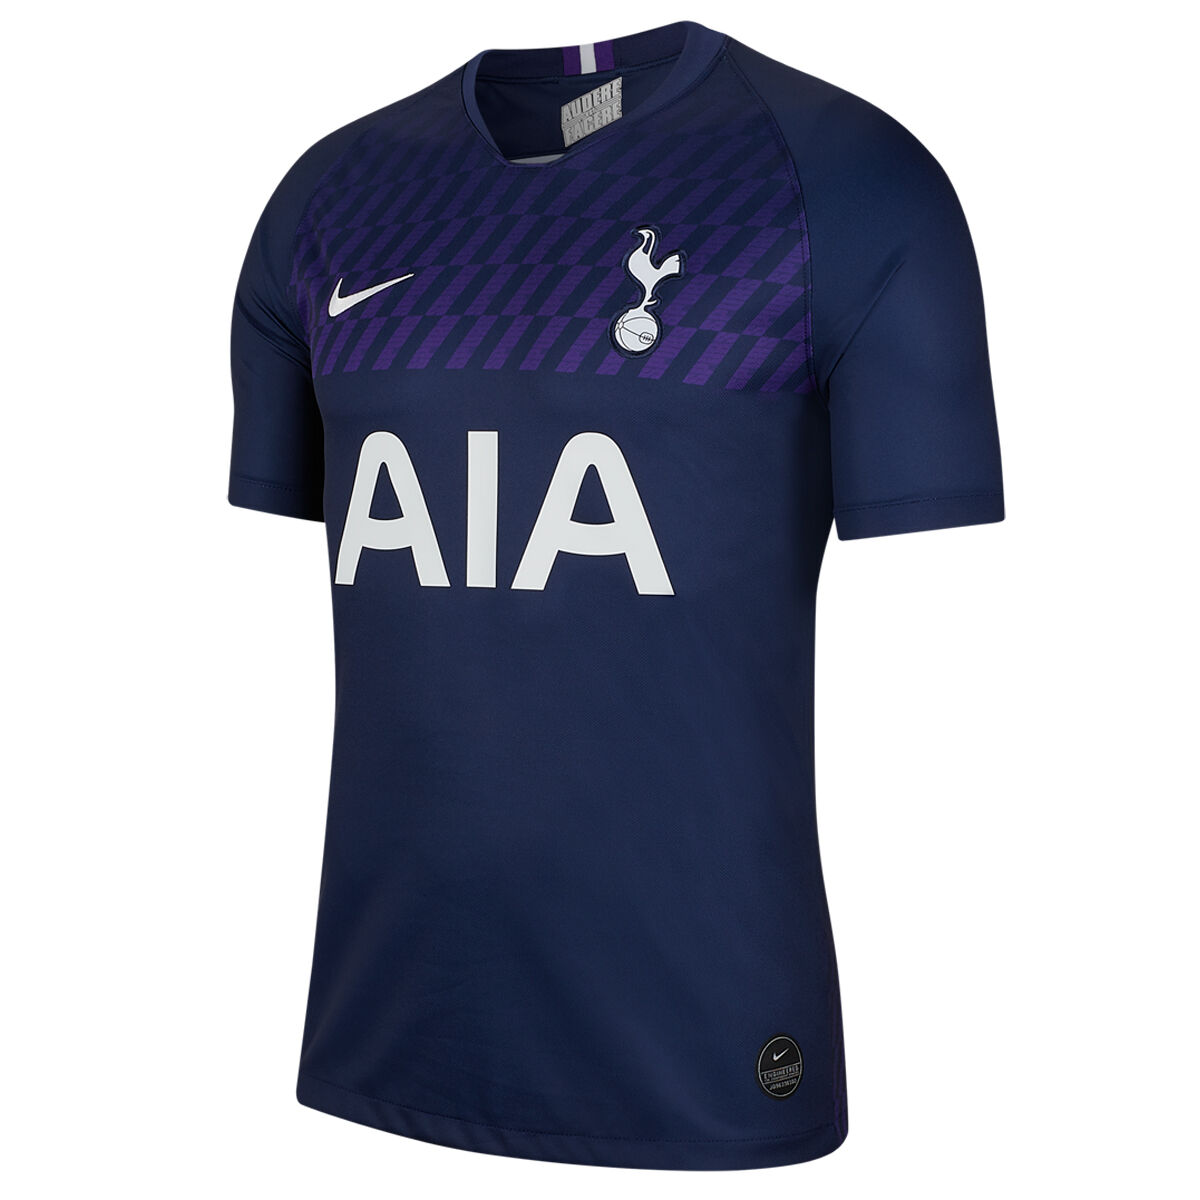 spurs cycling jersey